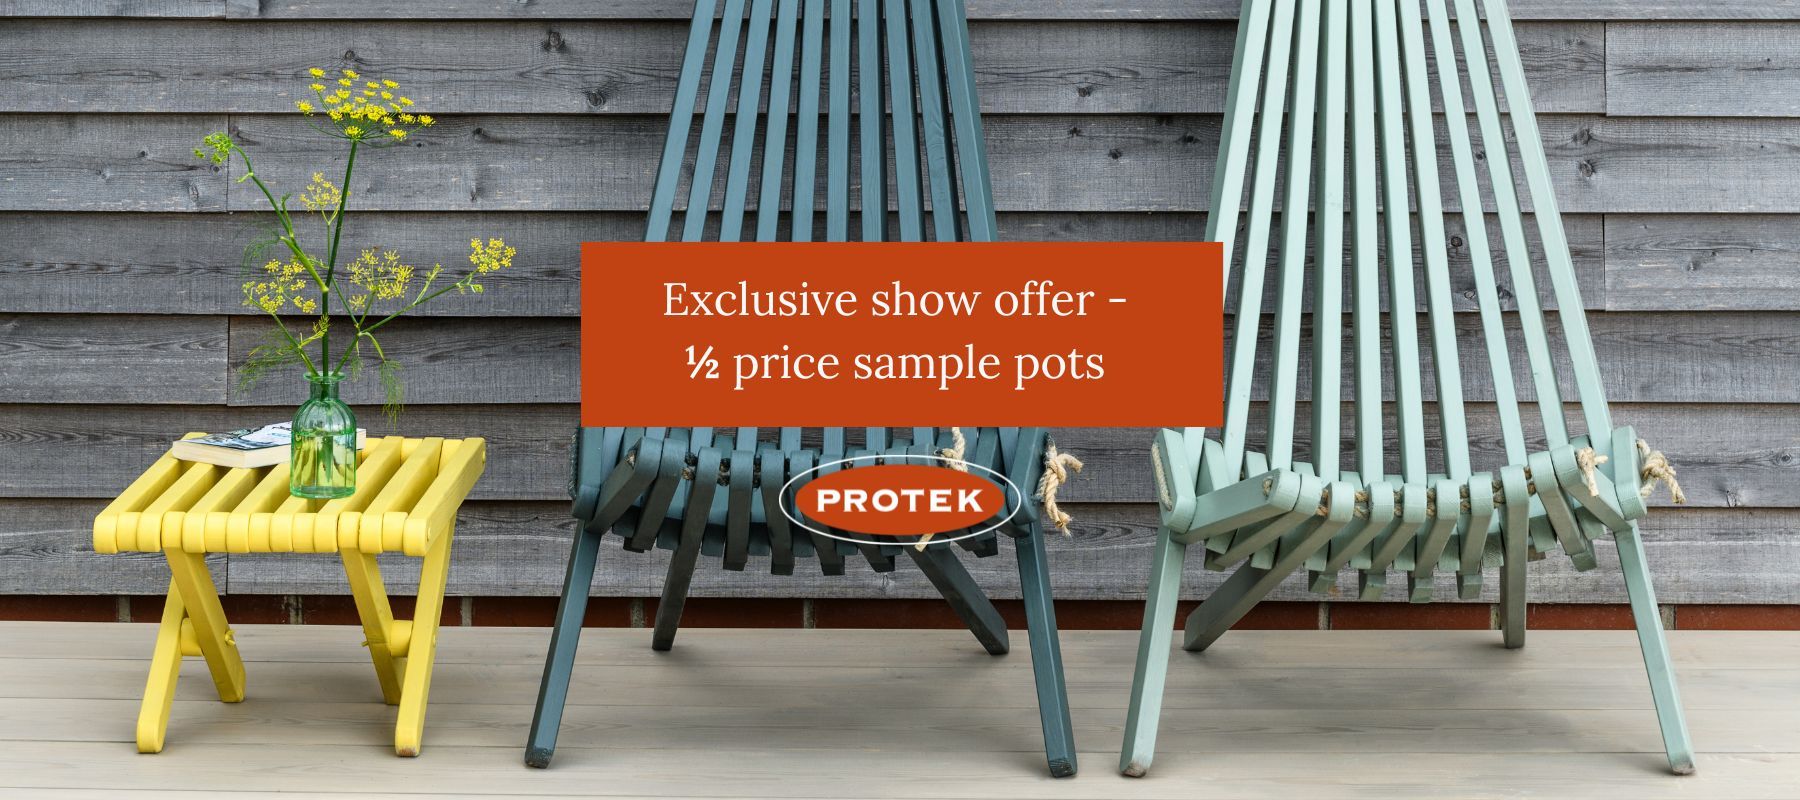 Exclusive show offer - ½ price sample pots